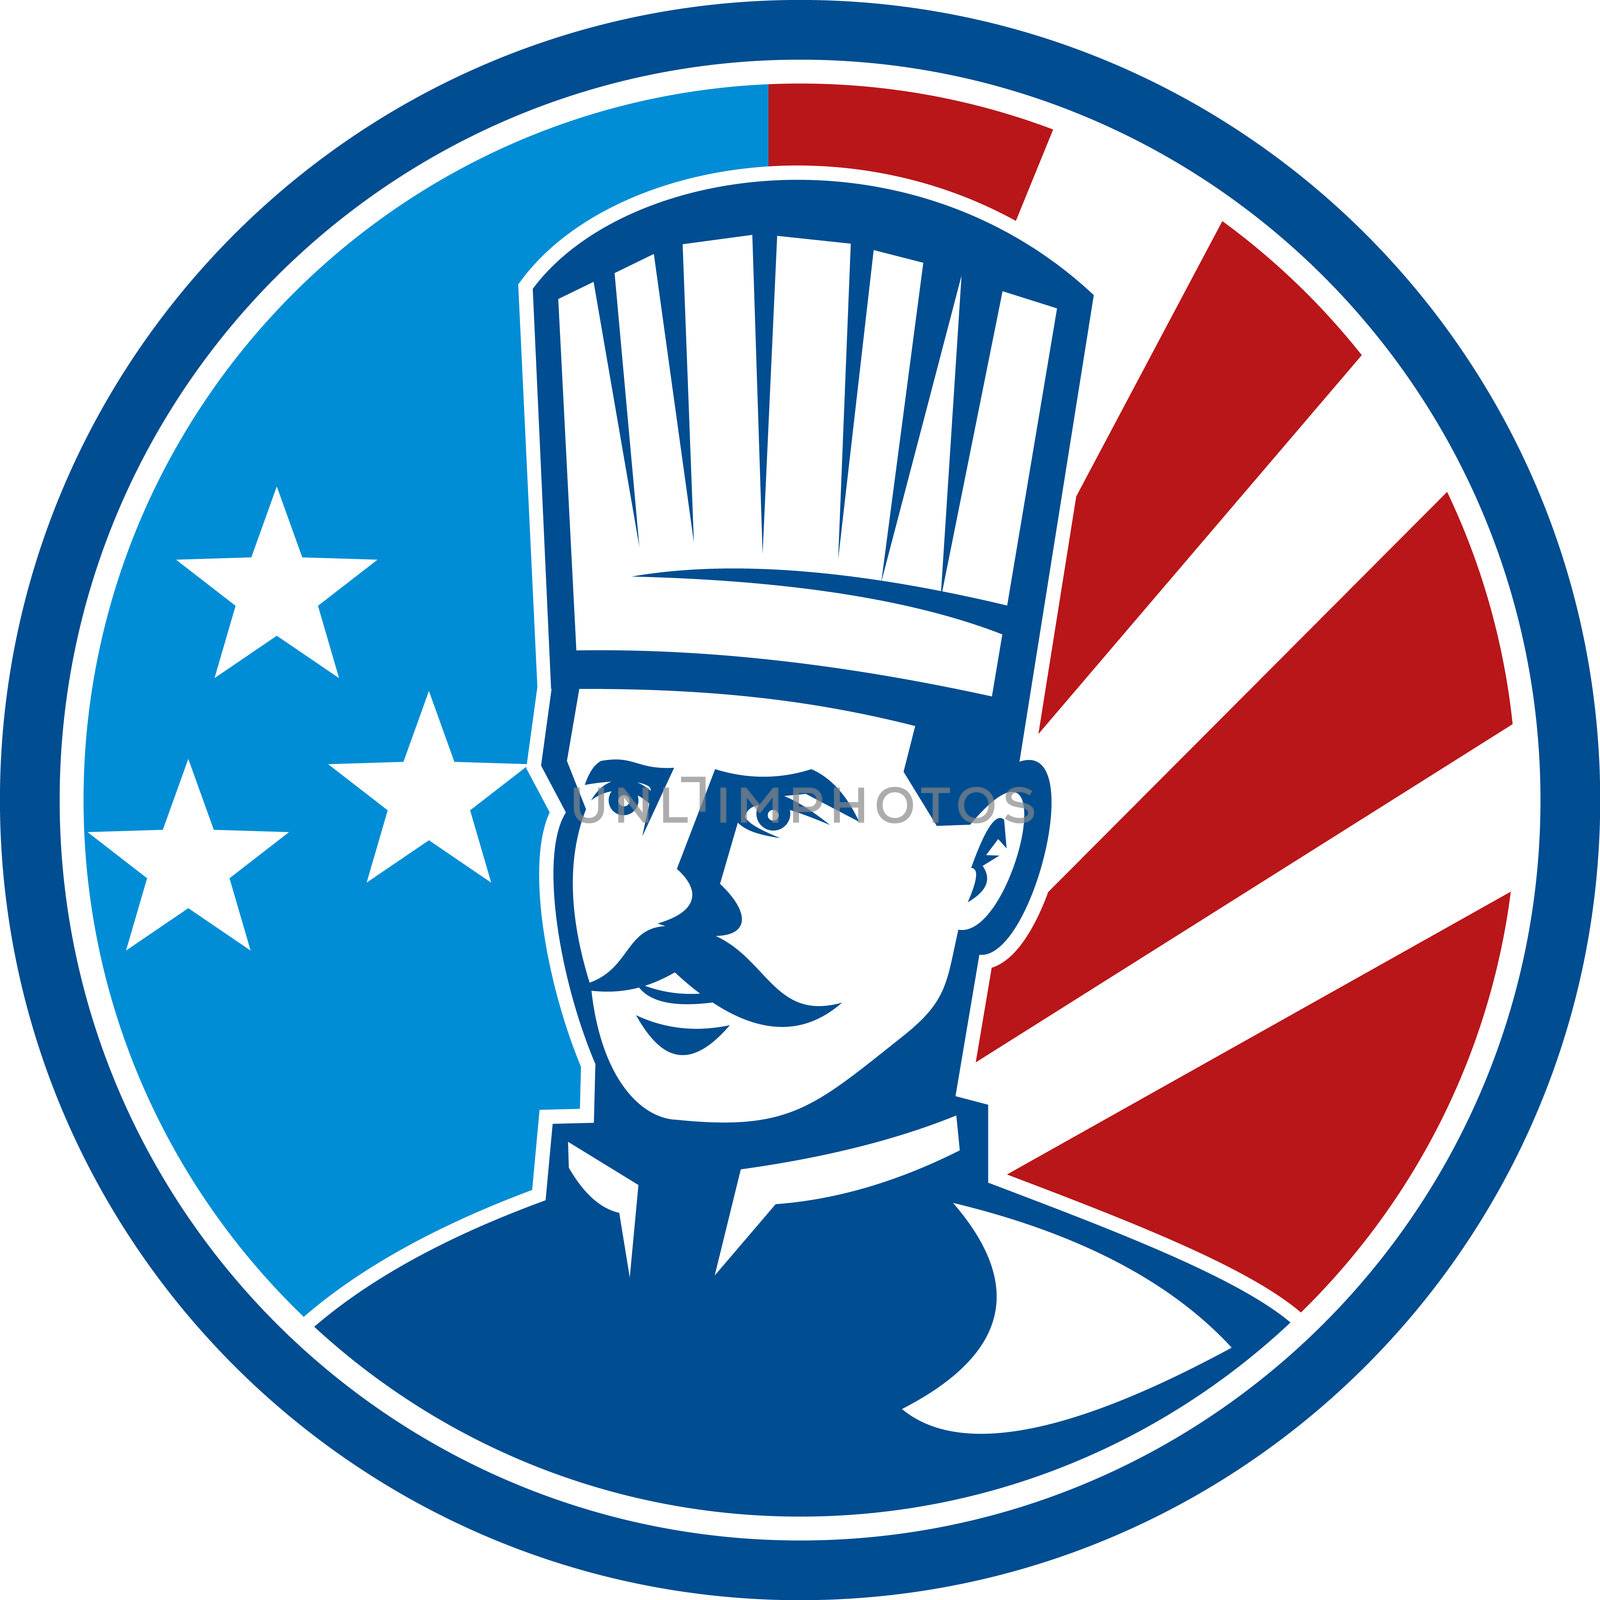 illustration of an American Chef cook baker with stars and stripes set inside a circle